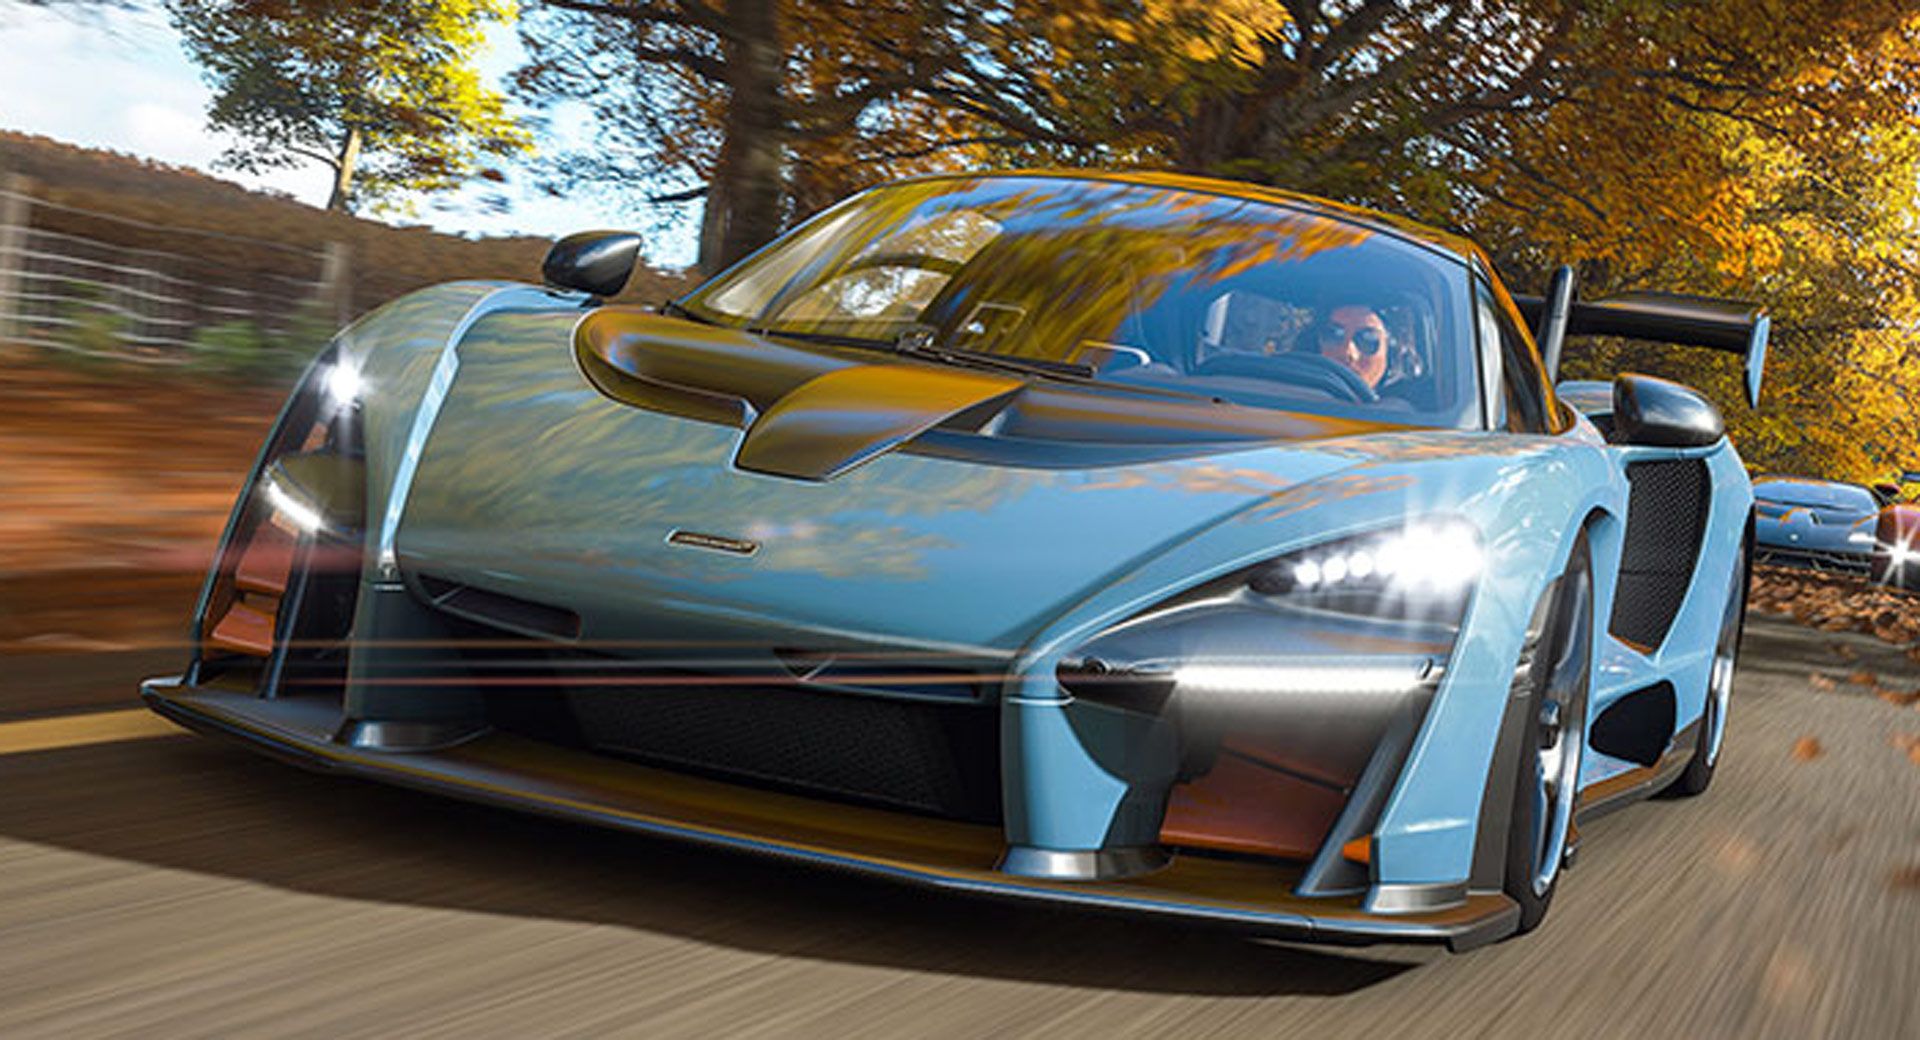 Forza Horizon 4 Puts The McLaren Senna And Much More In An Ever